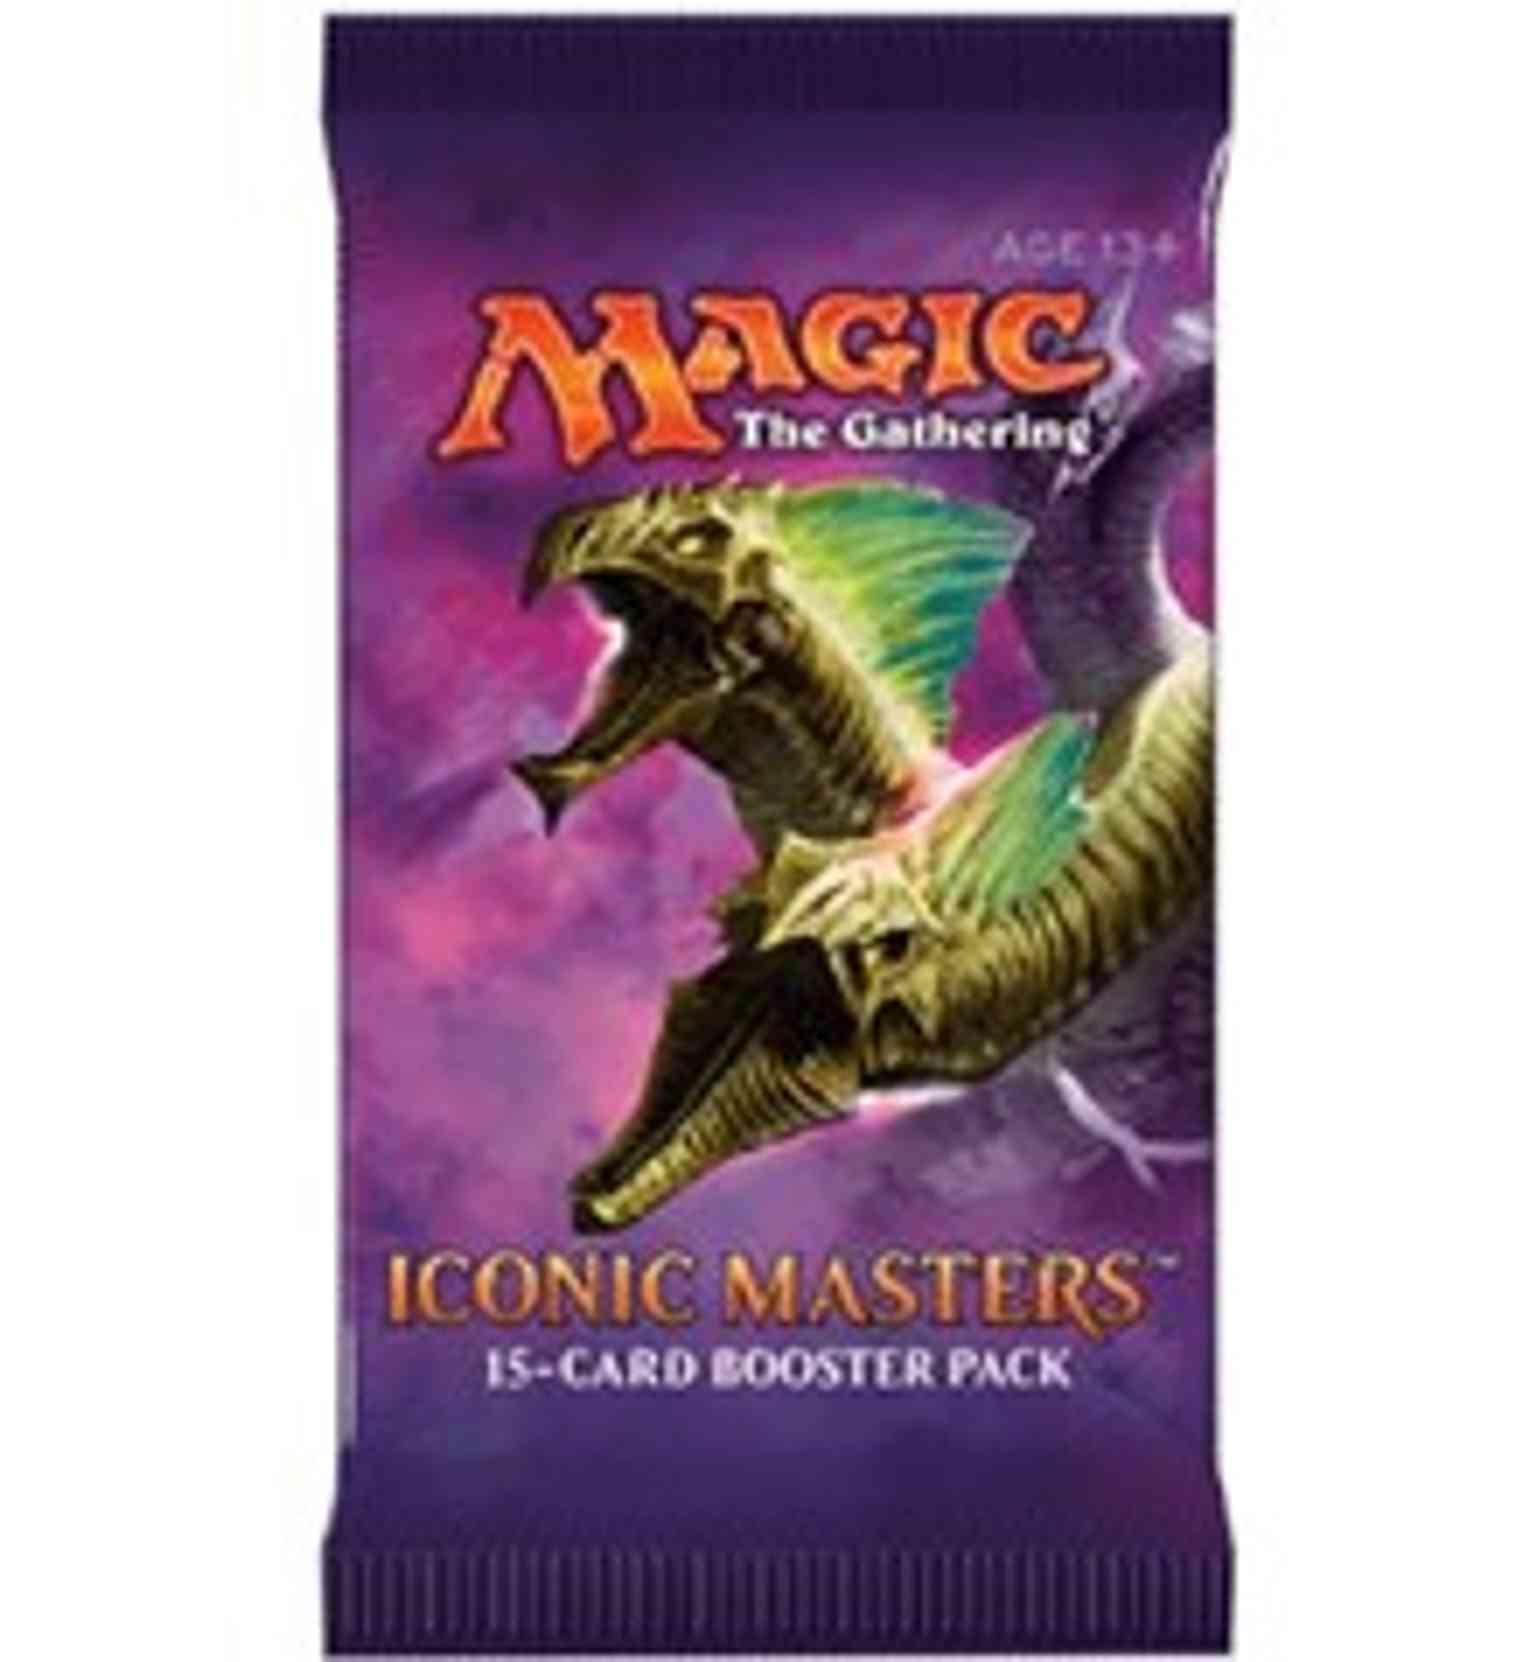 Iconic Masters - Booster Pack magic card front